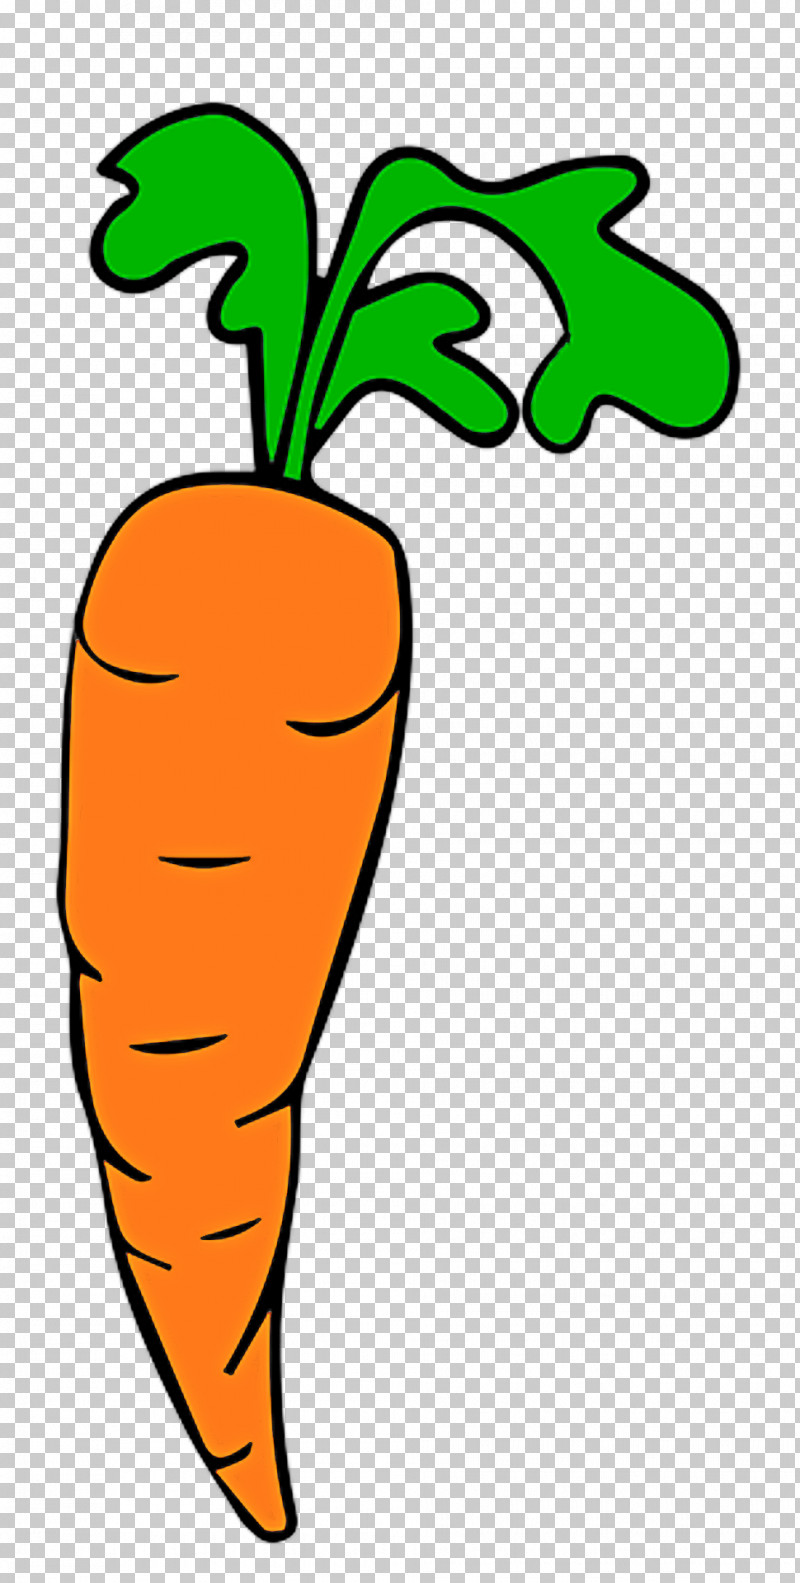 Carrot Root Vegetable Vegetable Radish Plant PNG, Clipart, Carrot, Food, Plant, Plant Stem, Radish Free PNG Download